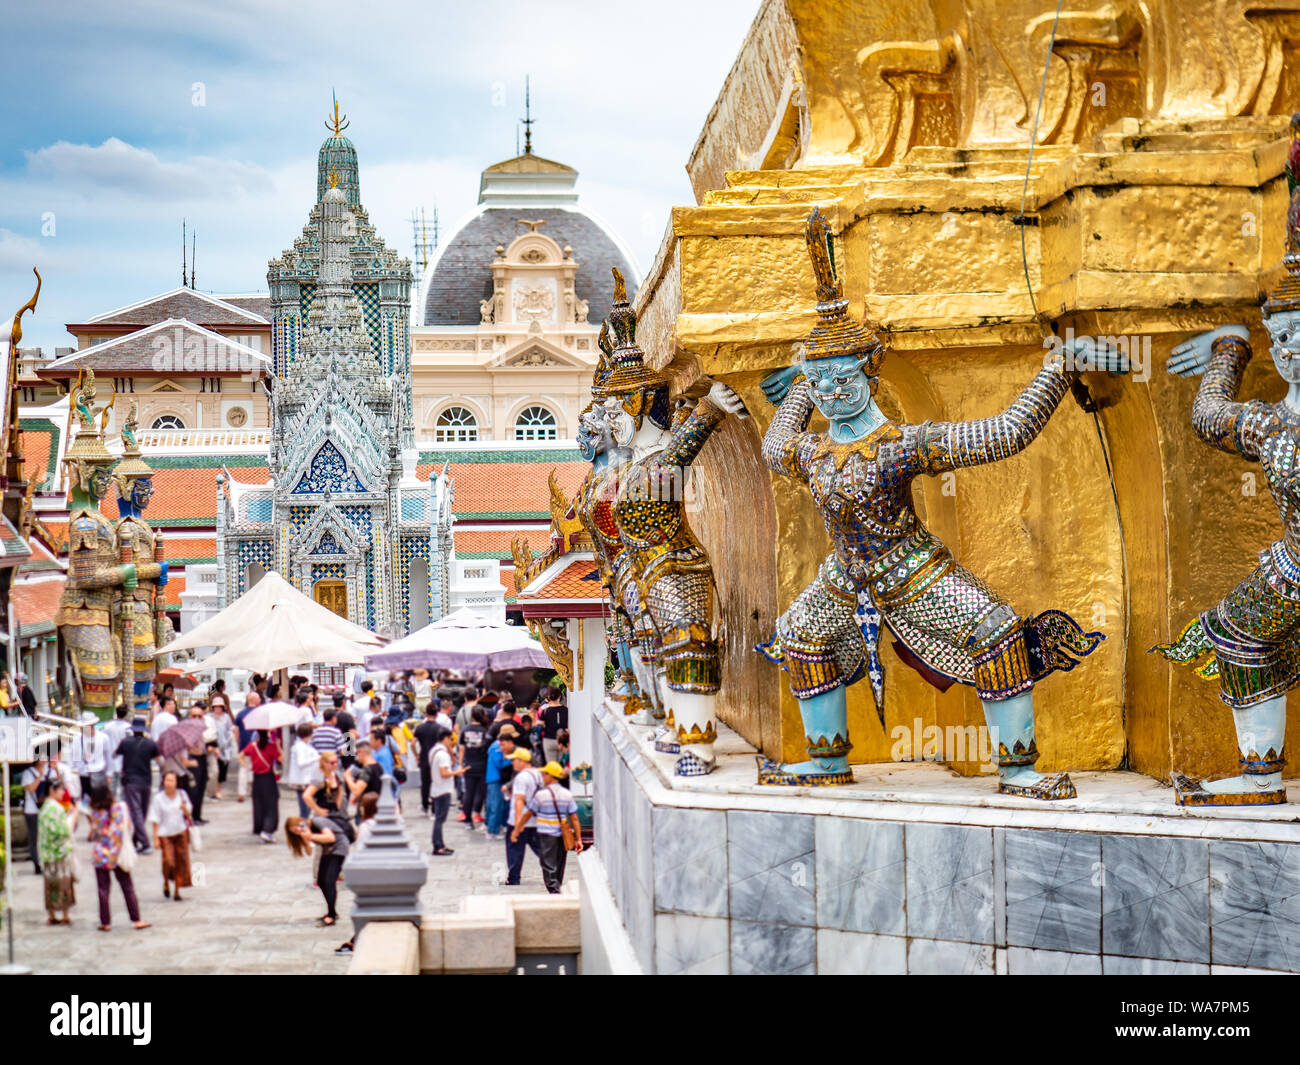 Golden monuments and Temple of Emerald Buddha, Grand Royal Palace in Bangkok, Thailand. Official residence of the Kings of Siam. Museum crowd tourists Stock Photo